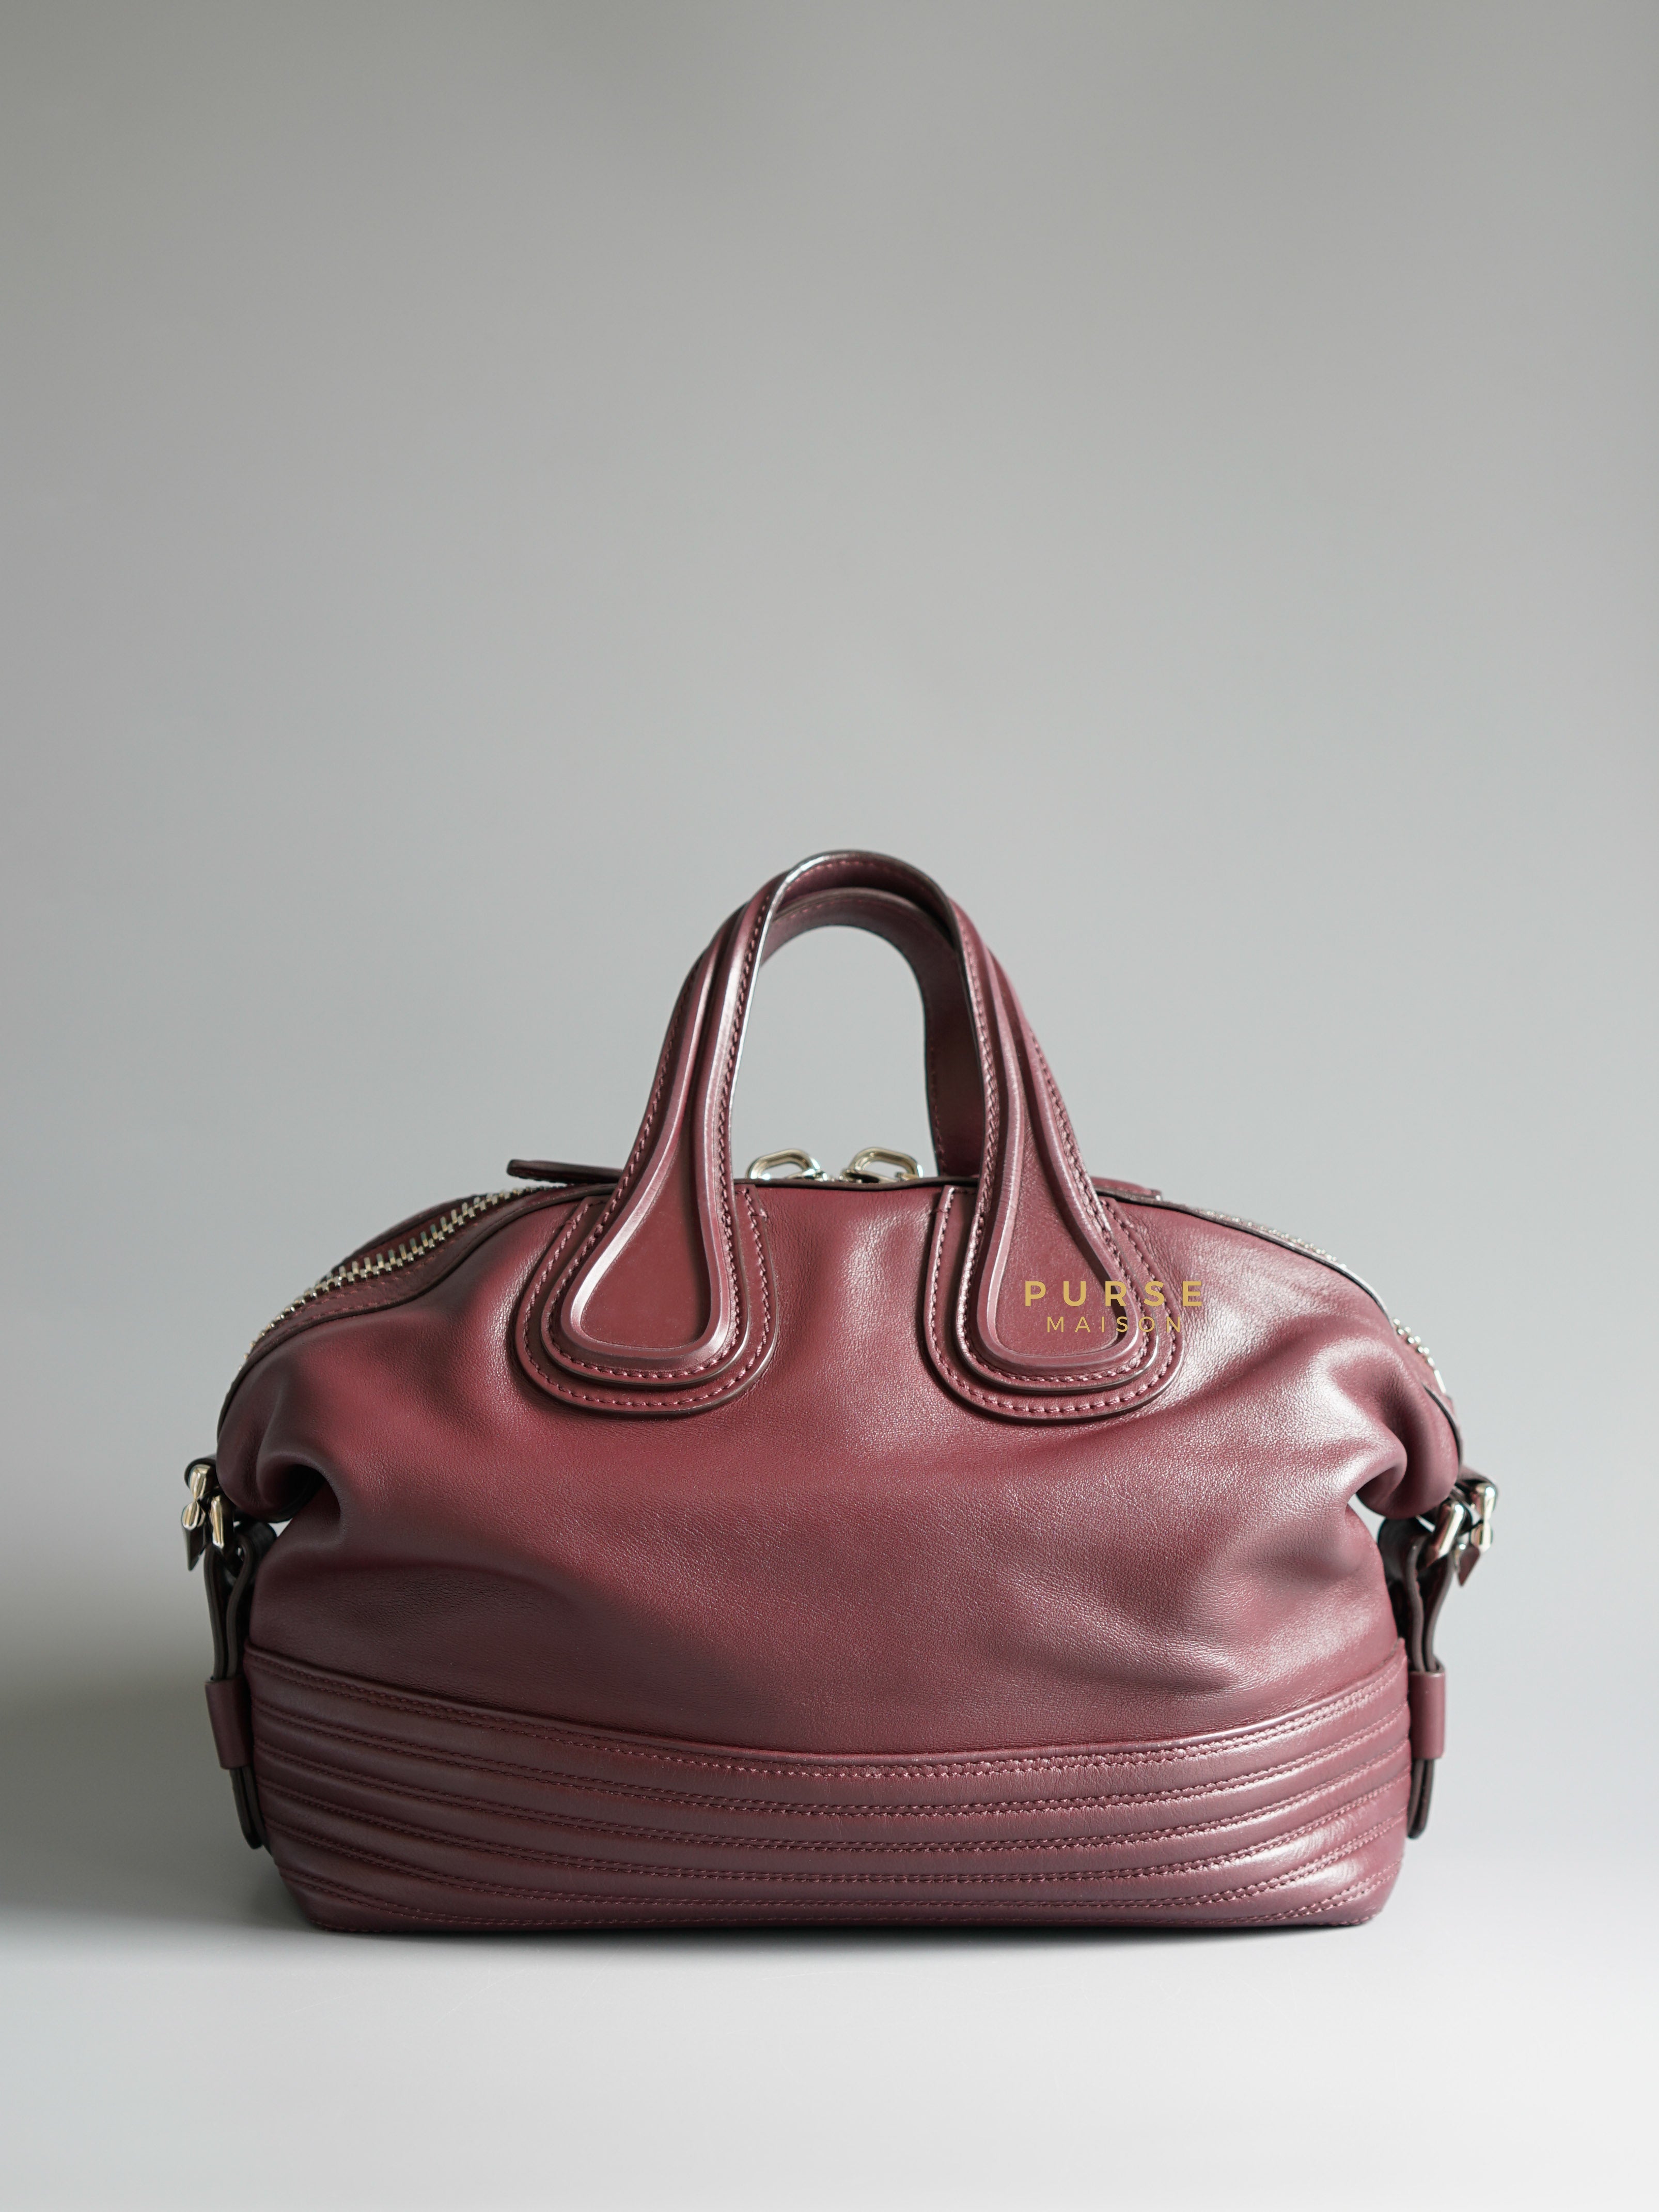 Givenchy Nightingale Maroon Small Bag | Purse Maison Luxury Bags Shop